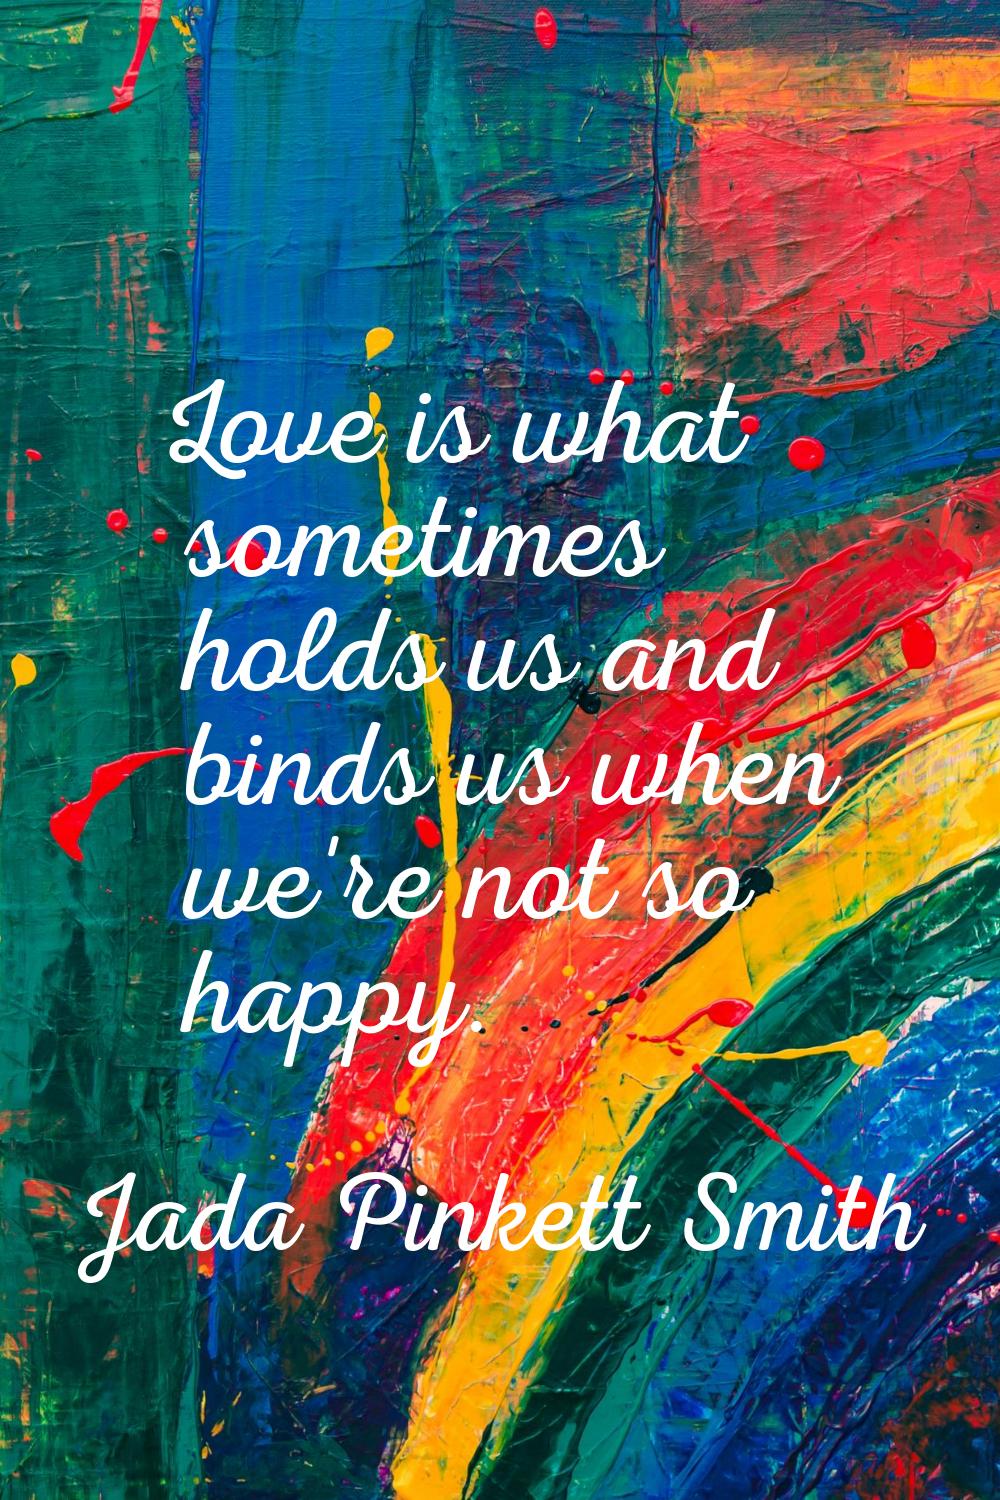 Love is what sometimes holds us and binds us when we're not so happy.